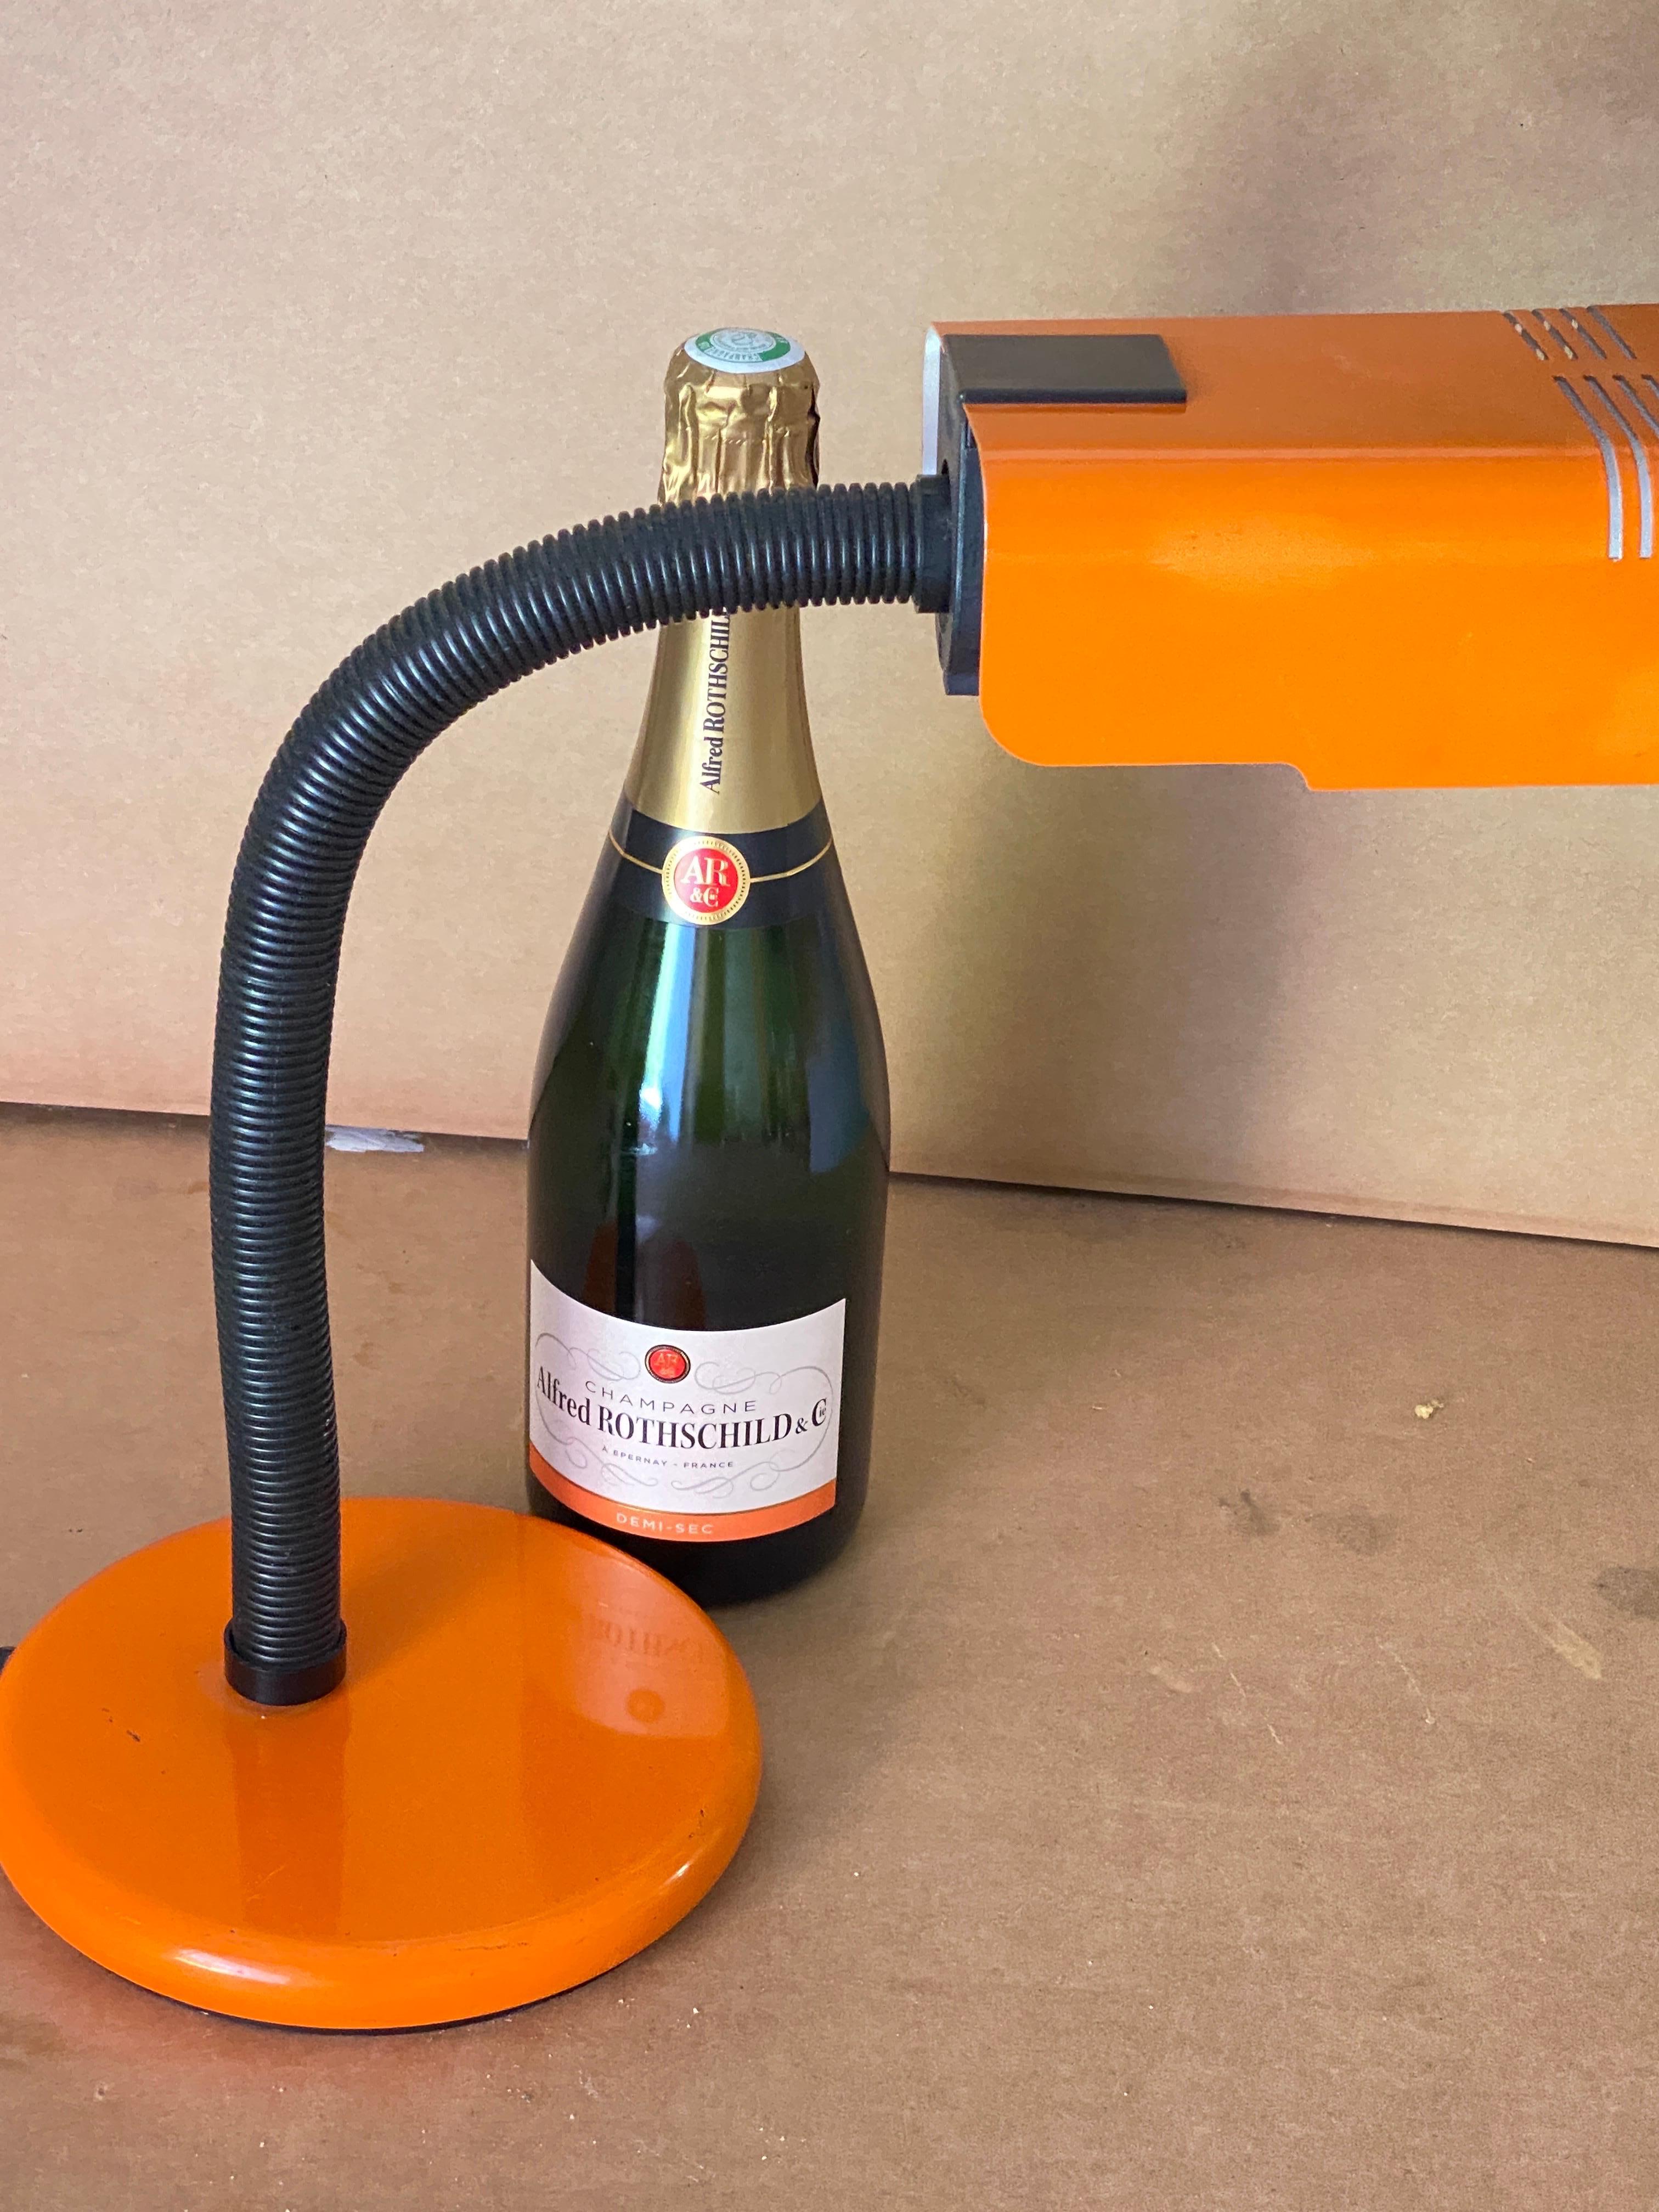 A Mid-Century Modern orange and black table lamp by Targetti. It works 110-240 volts and needs a regular e27 bulb. Lamp is marked on the bottom.
Articlable lamp, You can move either the assol lampshade or the shaft of the lamp by tilting down or up